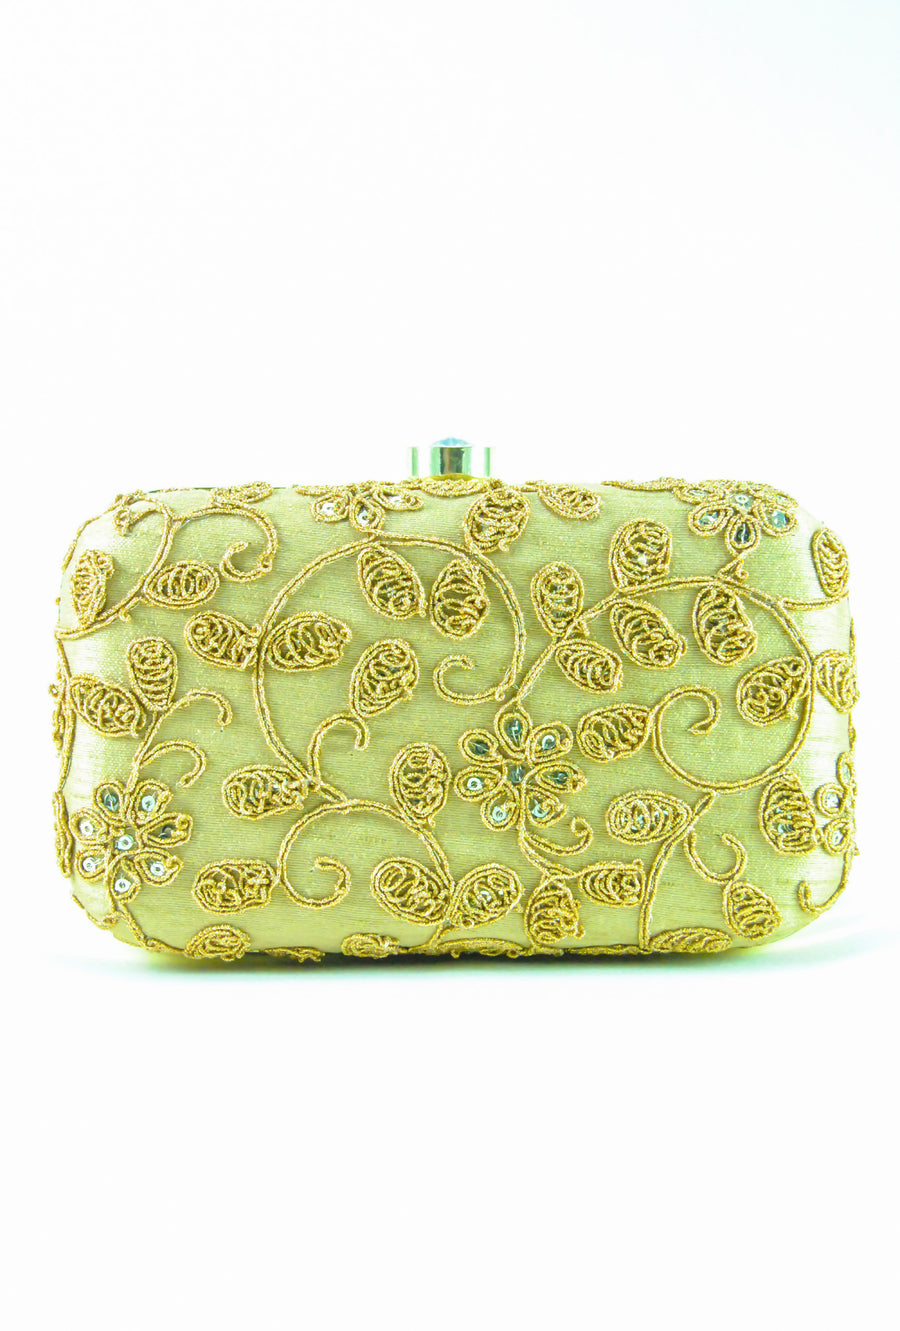 Gold Embroidered Clutch - Desi Royale